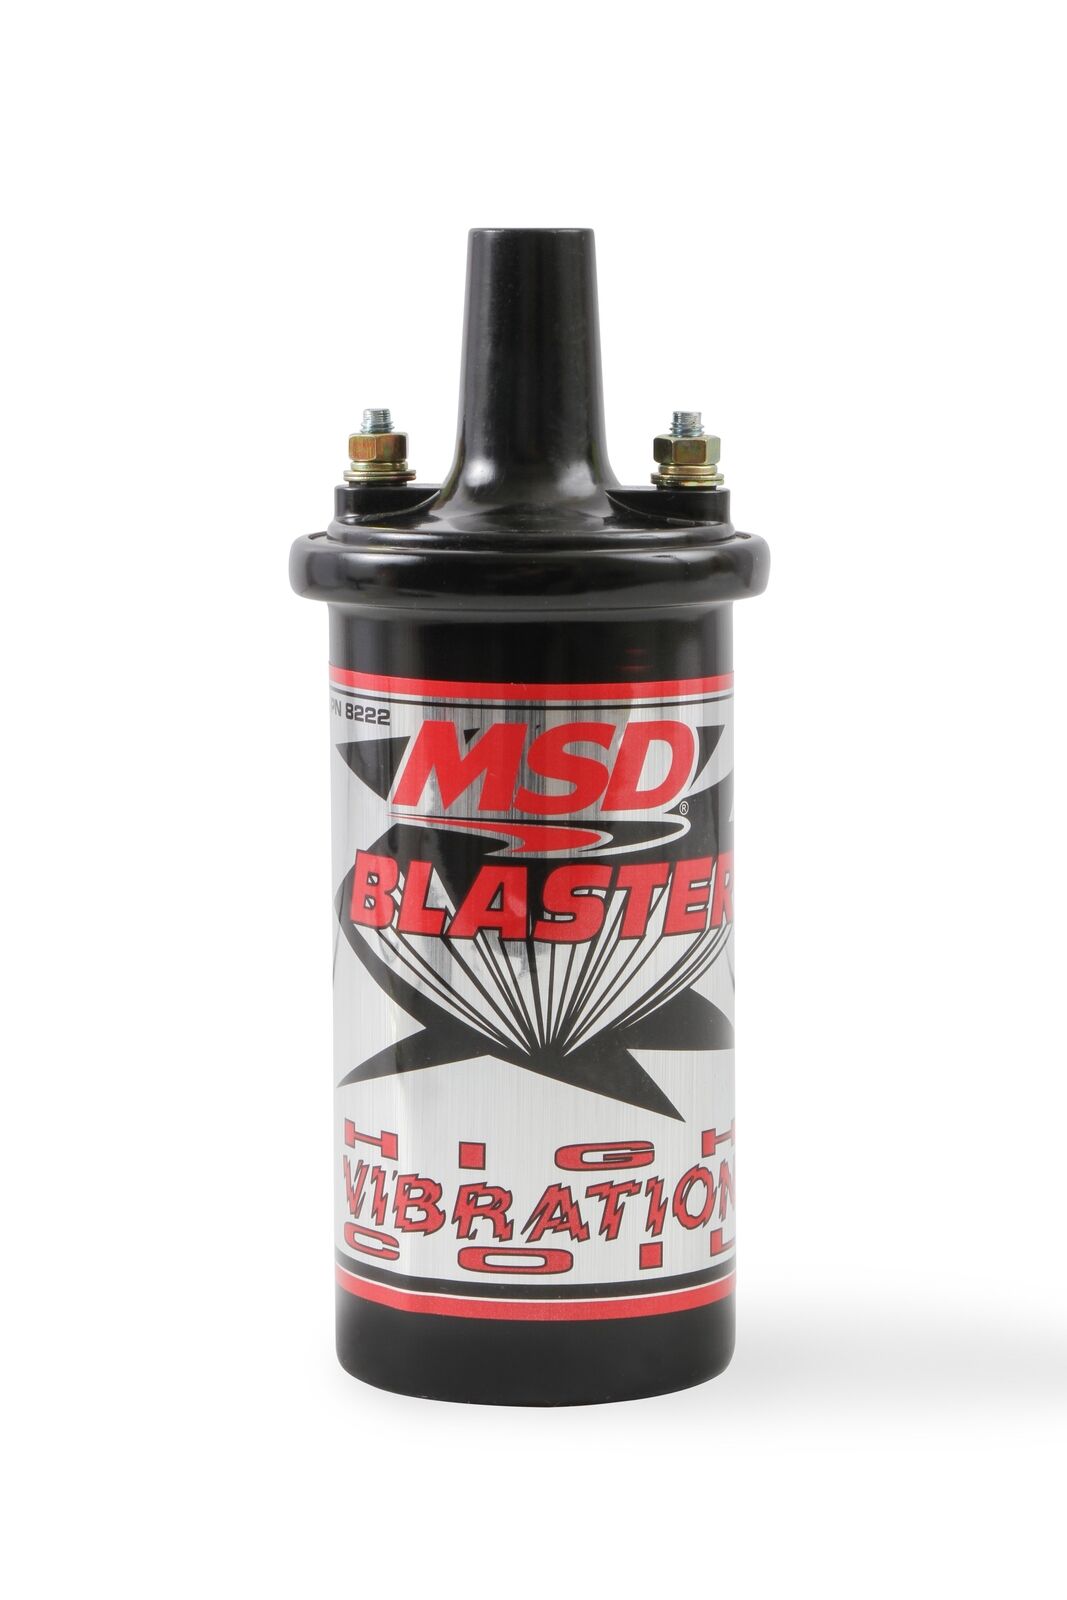 MSD 8222 Ignition Coil Blaster Series, Canister Style, High Vibration, Black,